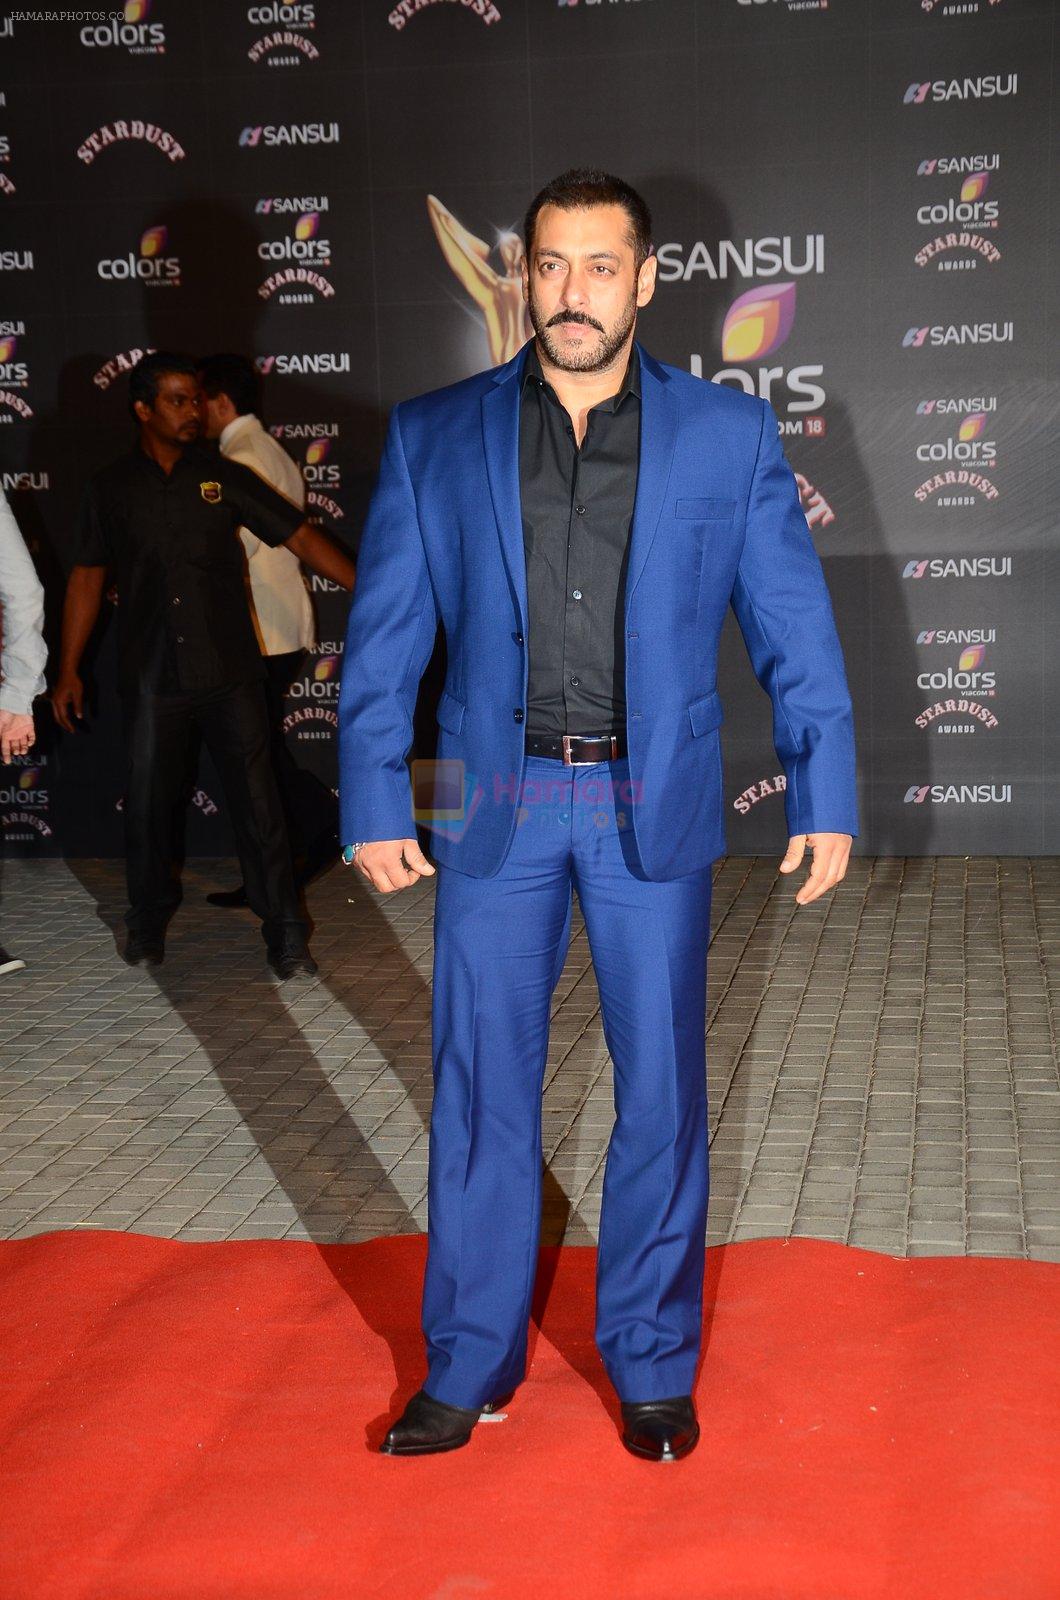 Salman Khan at the red carpet of Stardust awards on 21st Dec 2015